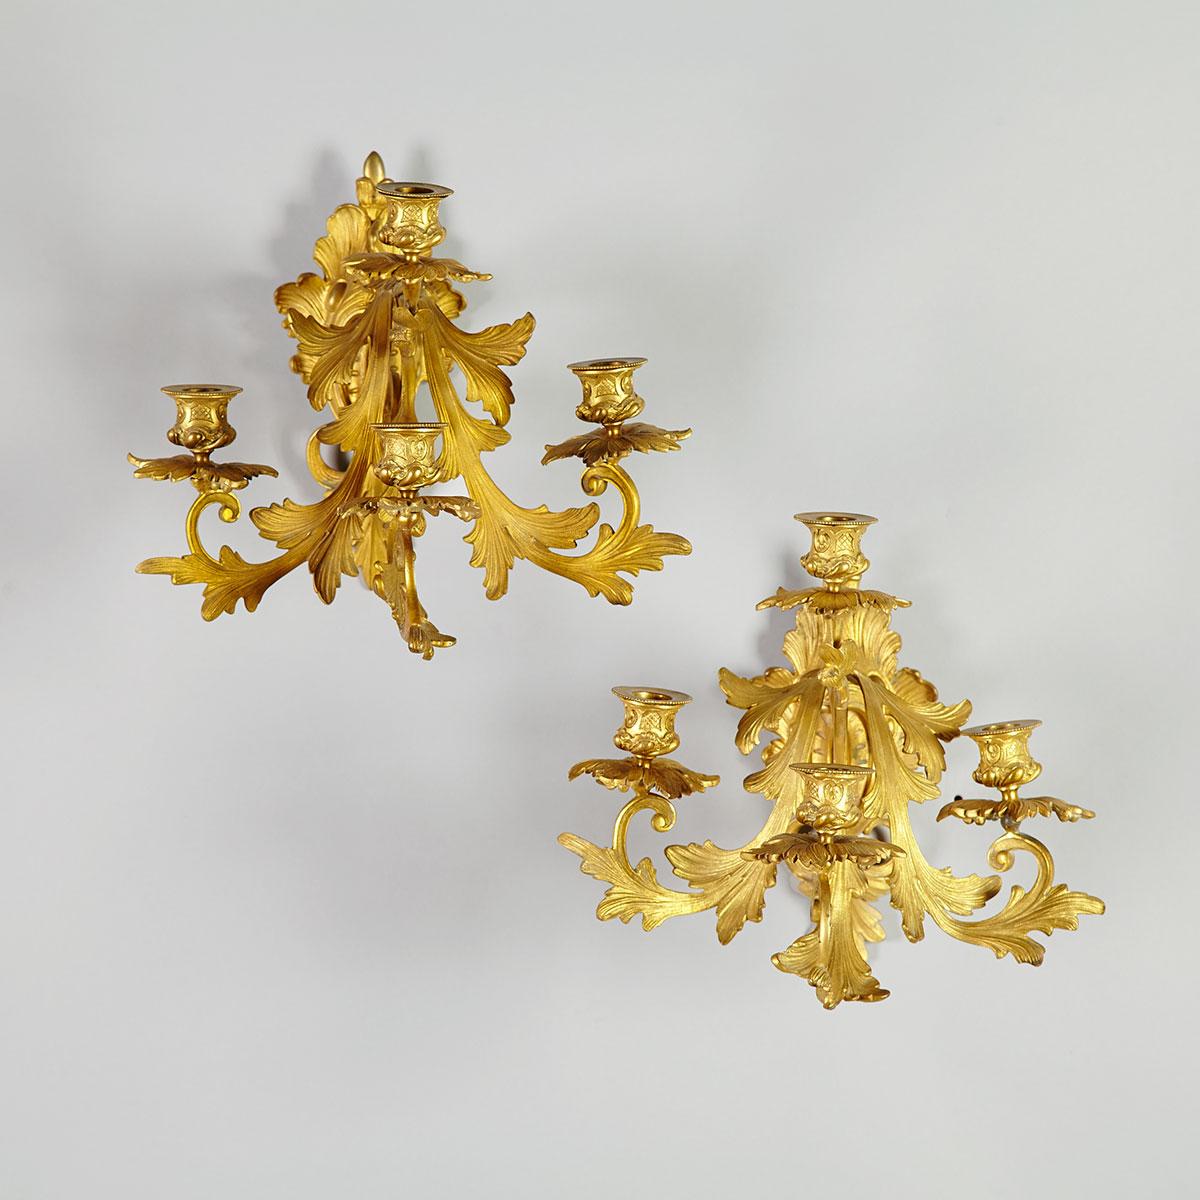 Pair of French Louis XV Style Gilt Bronze Four Light Wall Sconces, 19th century